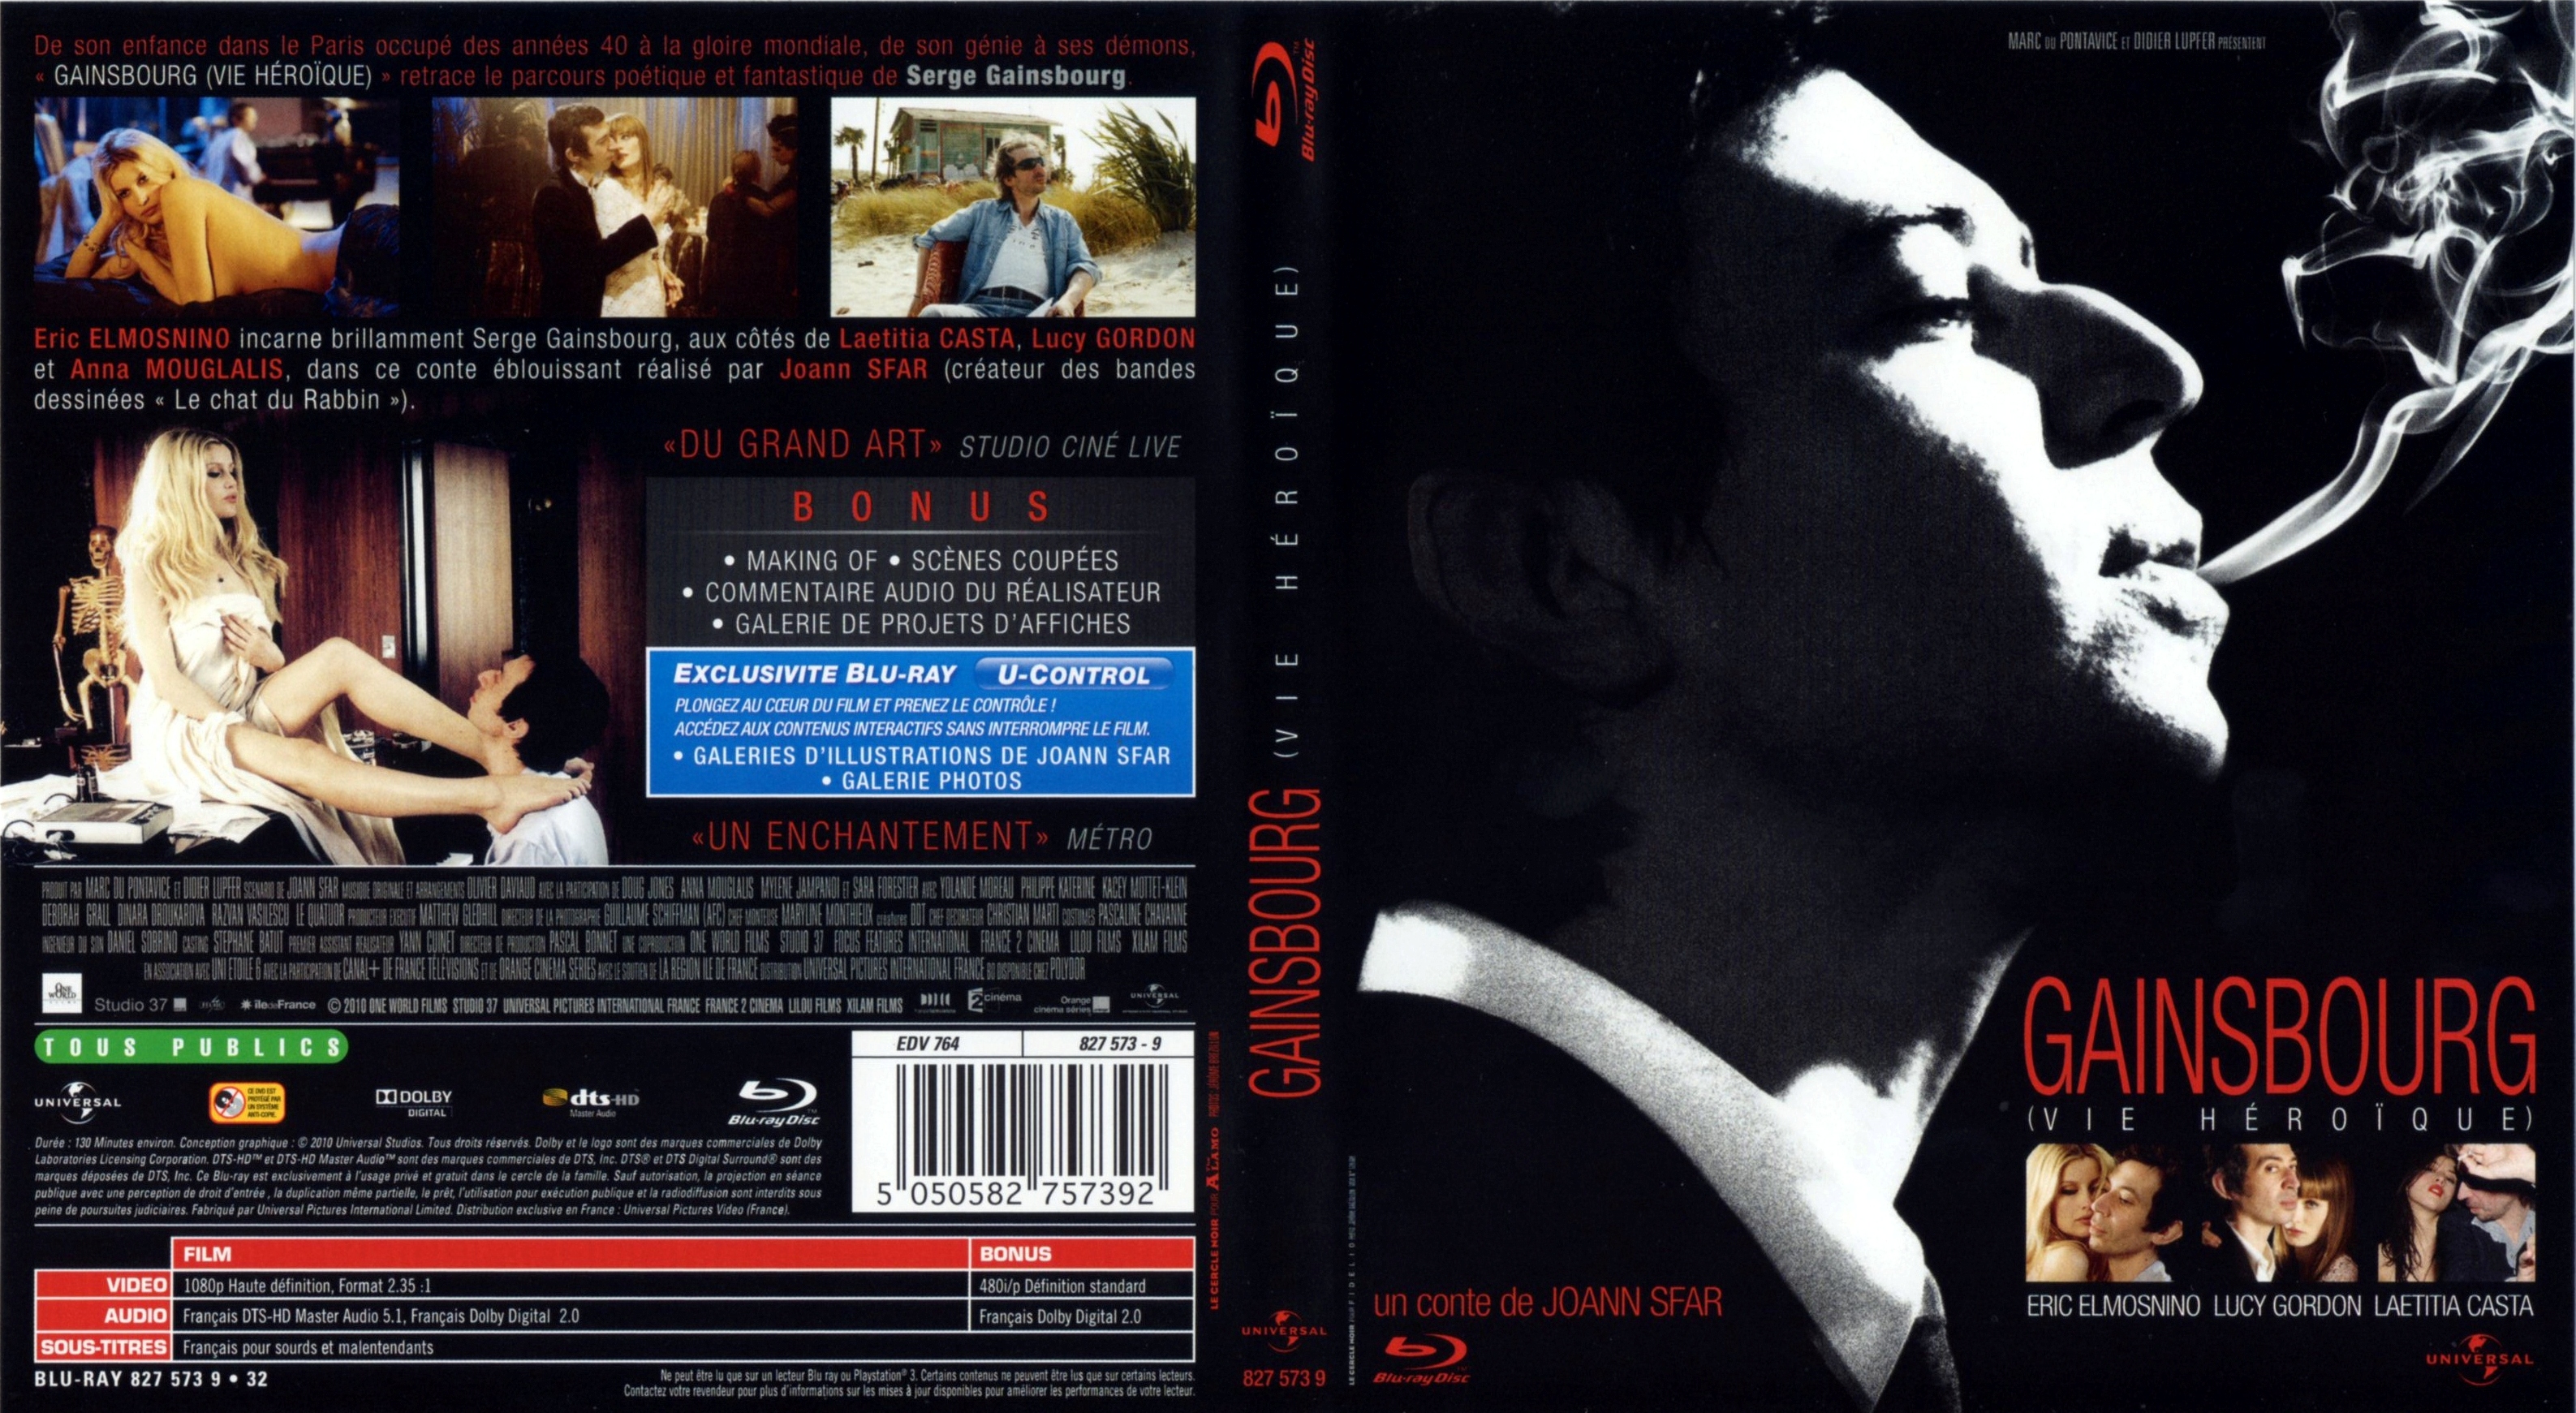 Jaquette DVD Gainsbourg une vie hroique (BLU-RAY)